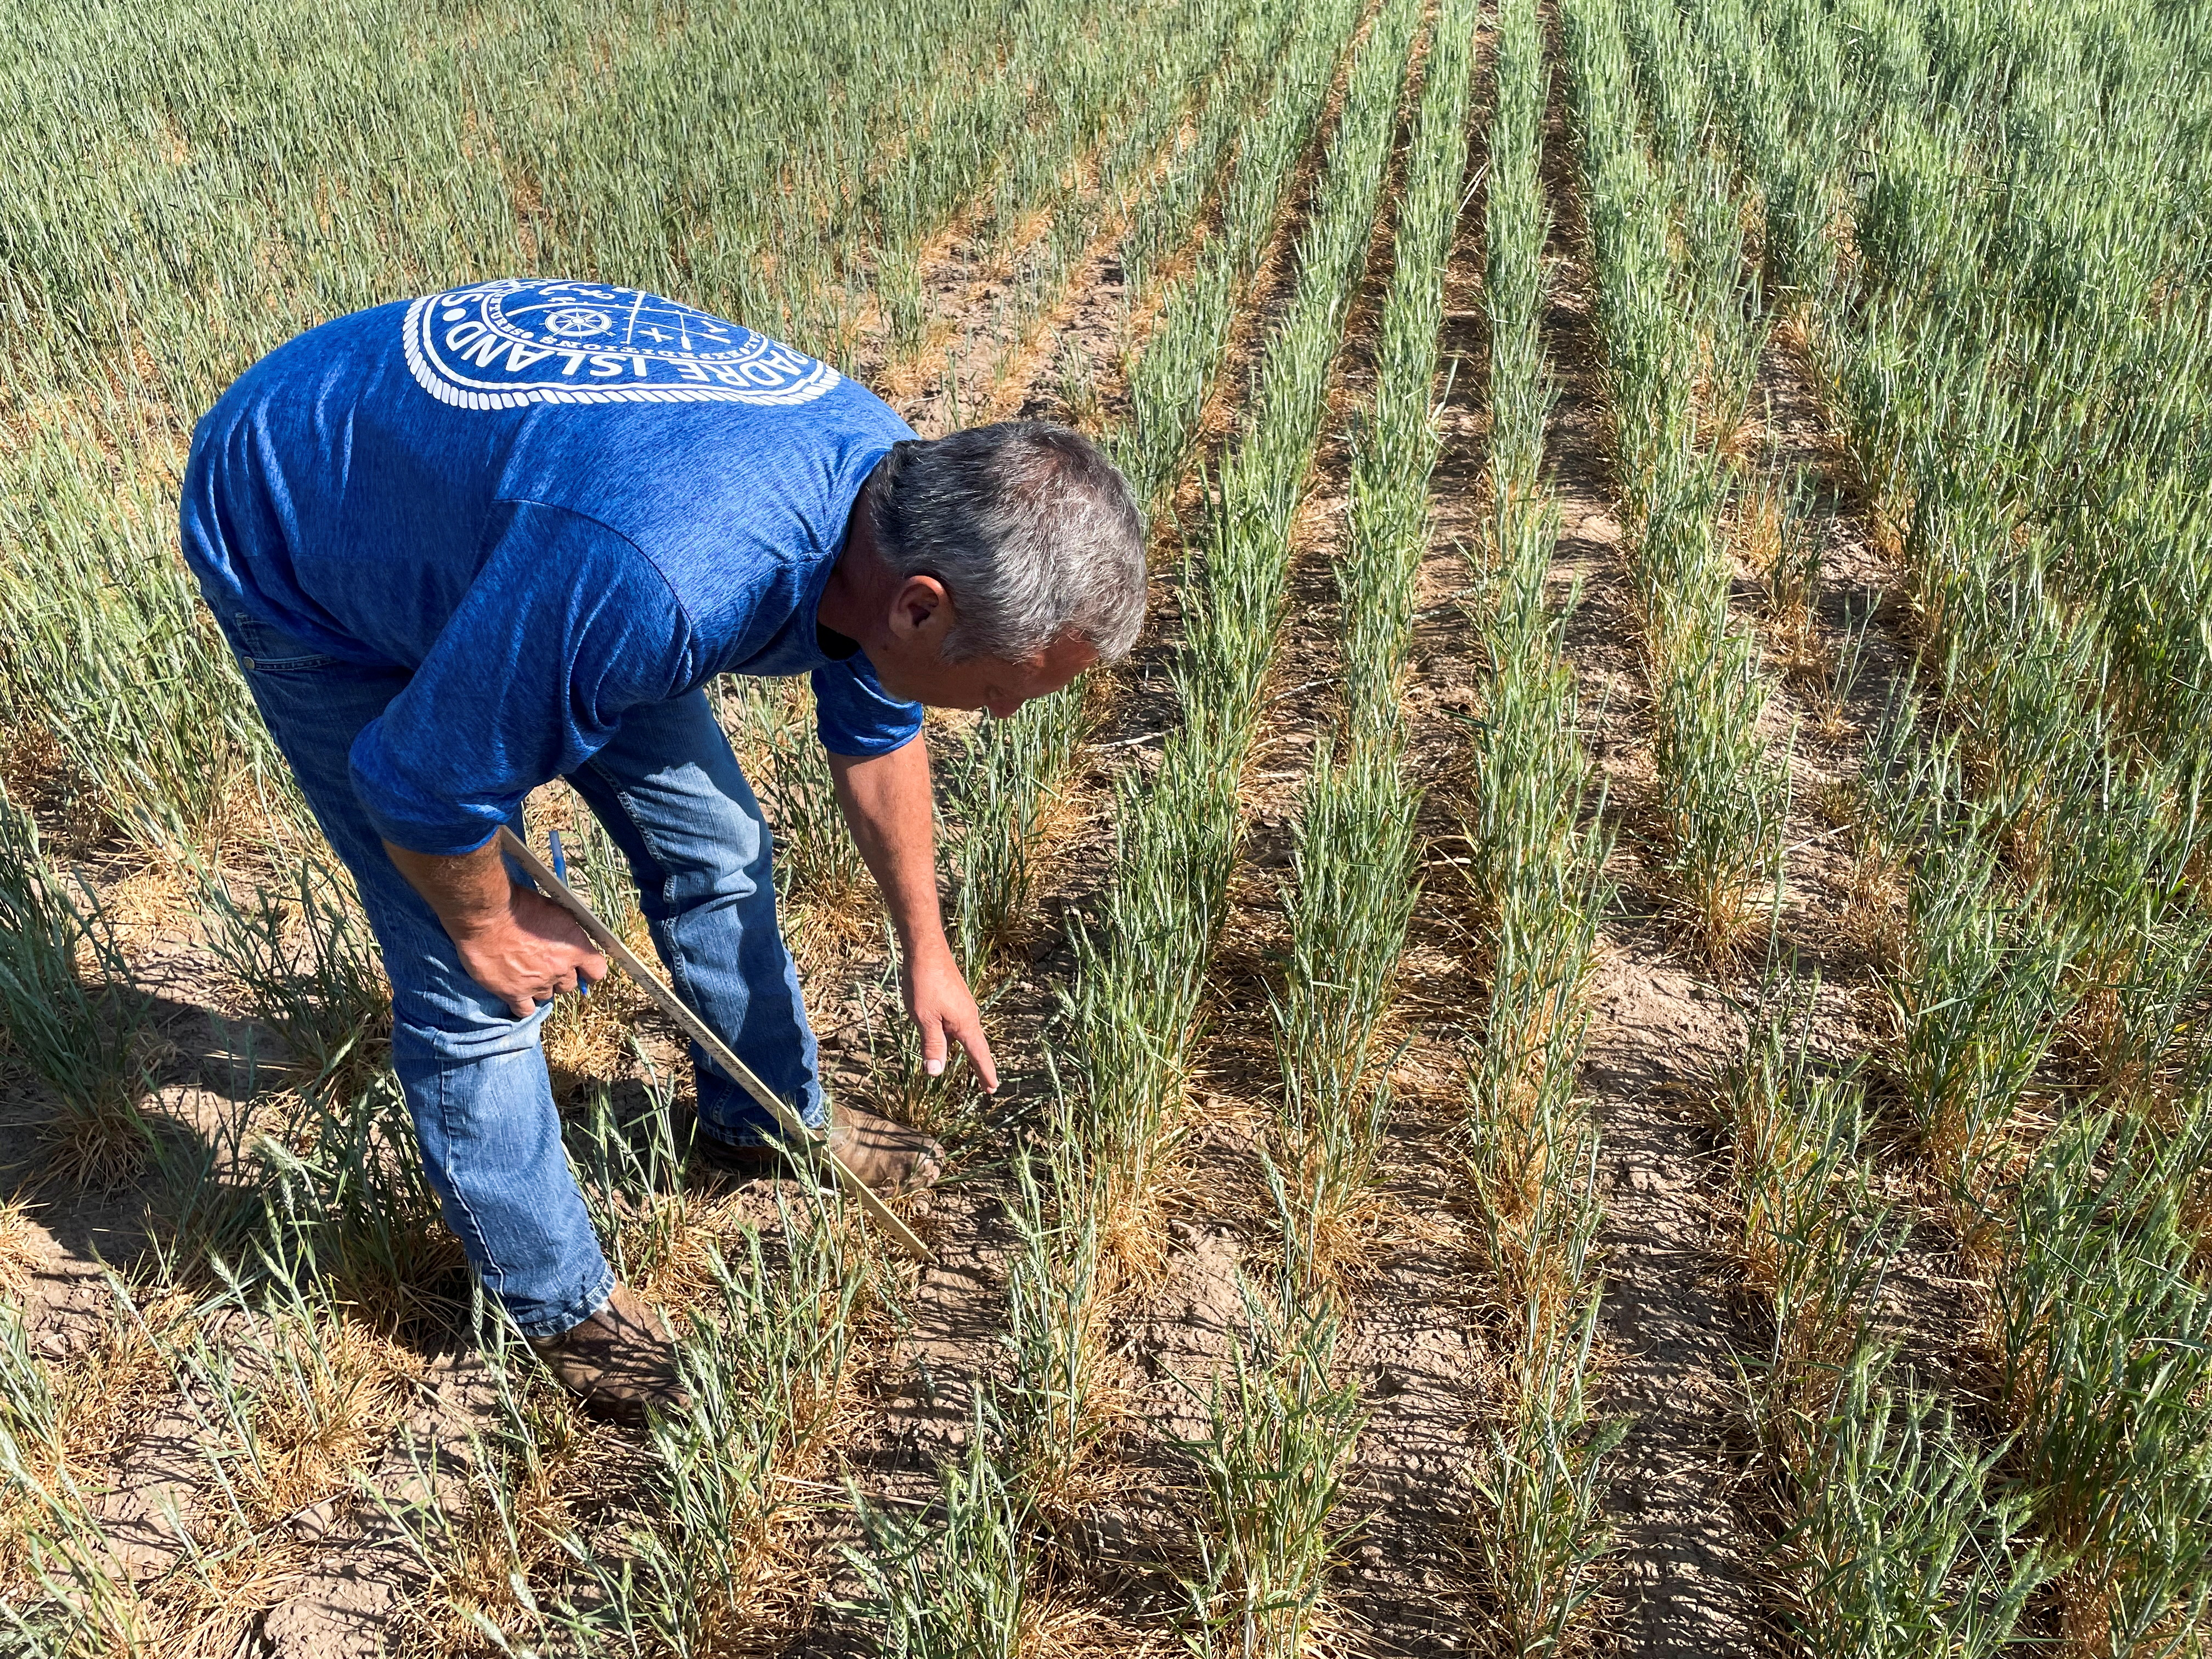 Gary Millershaski, a farmer and scout on the Wheat Quality Council's Kansas wheat tour, inspects winter wheat stunted by drought near Syracuse